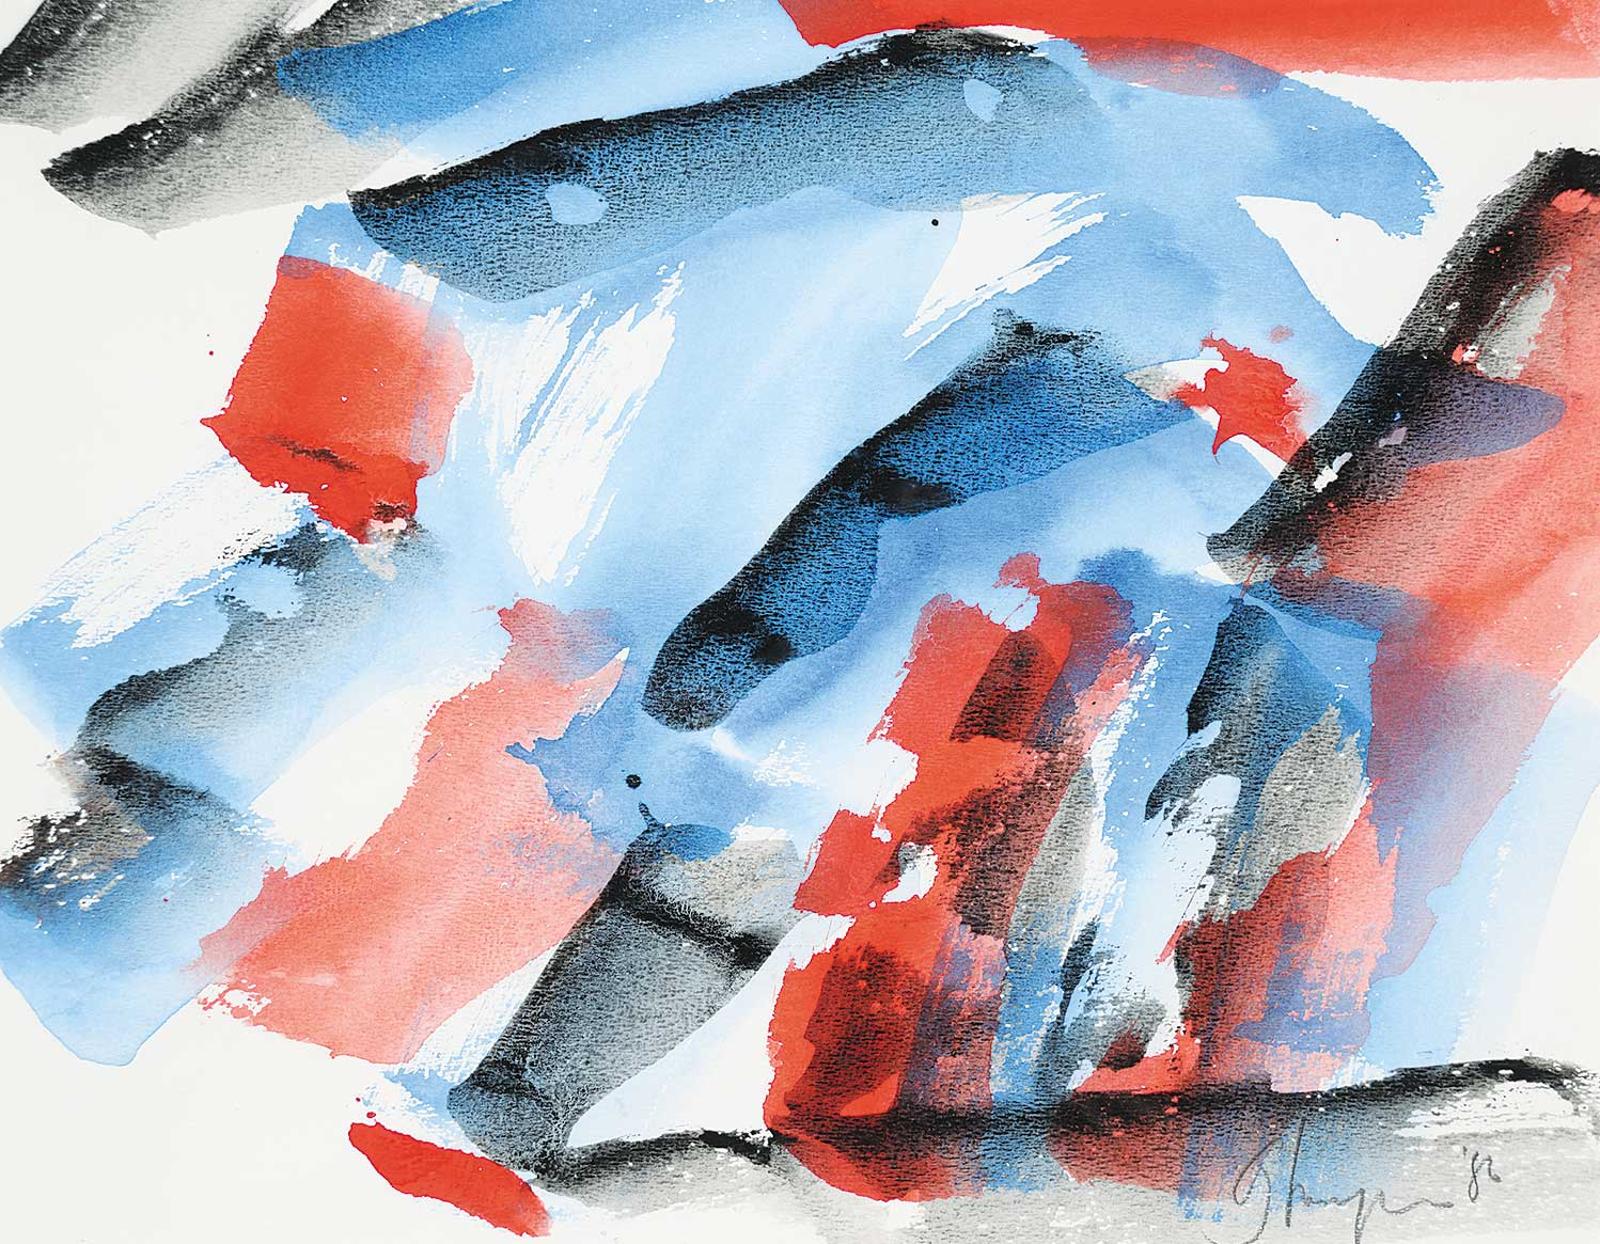 Georges Loranger (1931-1993) - Untitled - Study in Red, Blue and Black